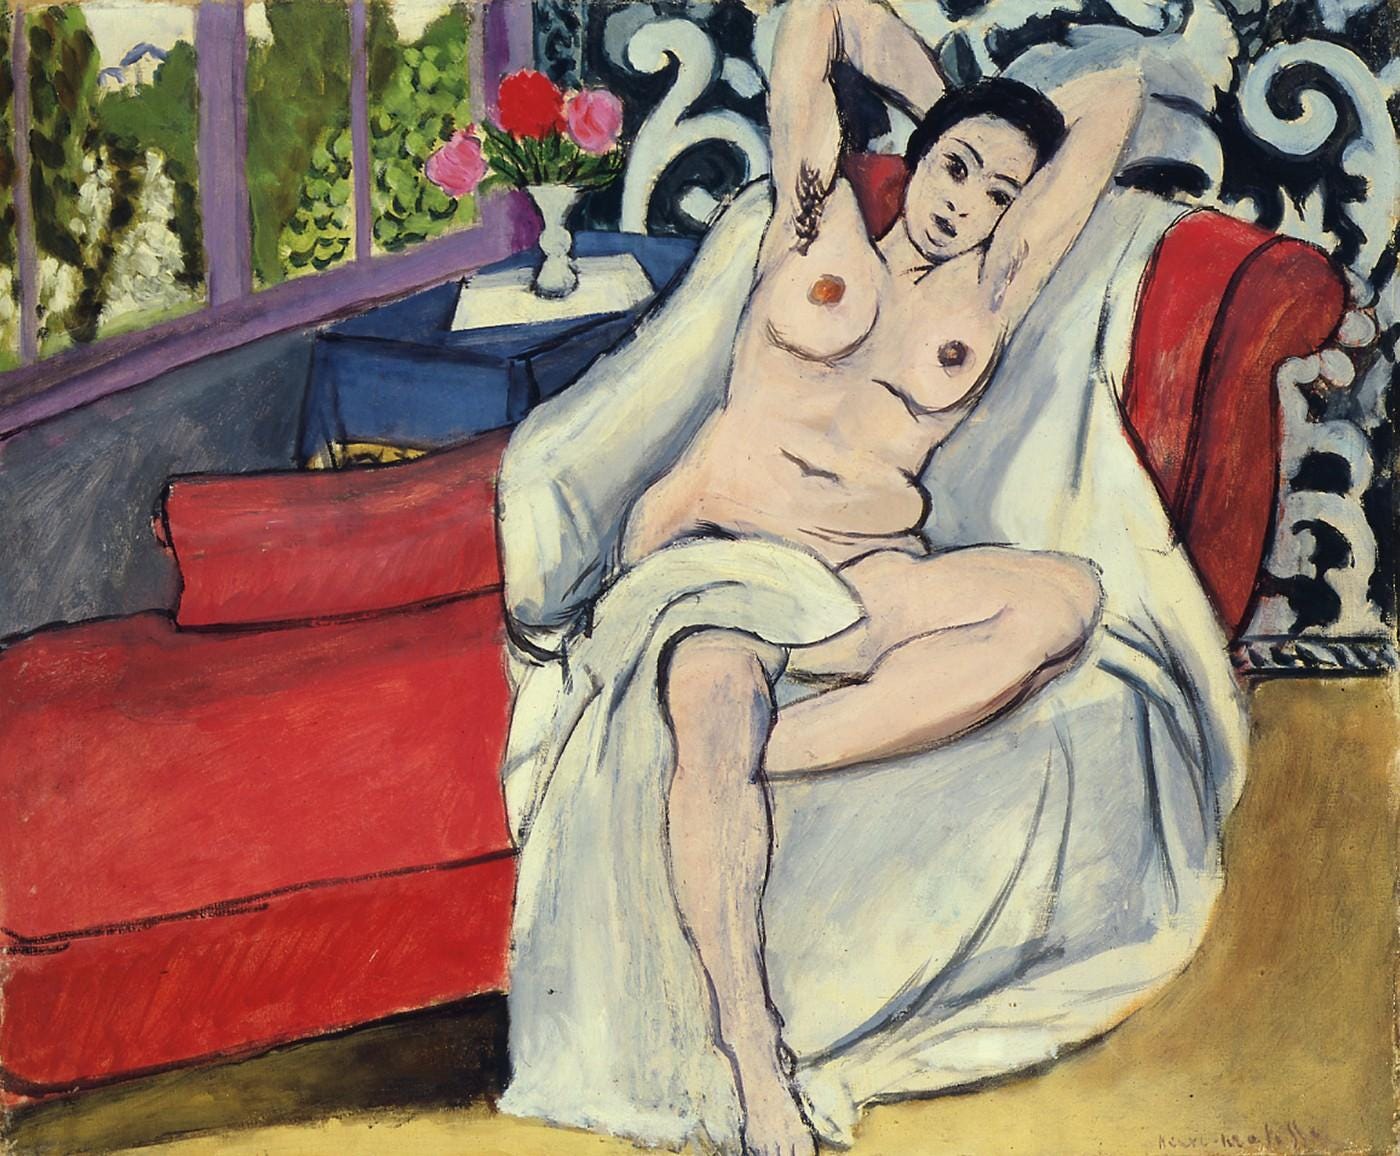 A Matisse painting of a nude on a red sofa